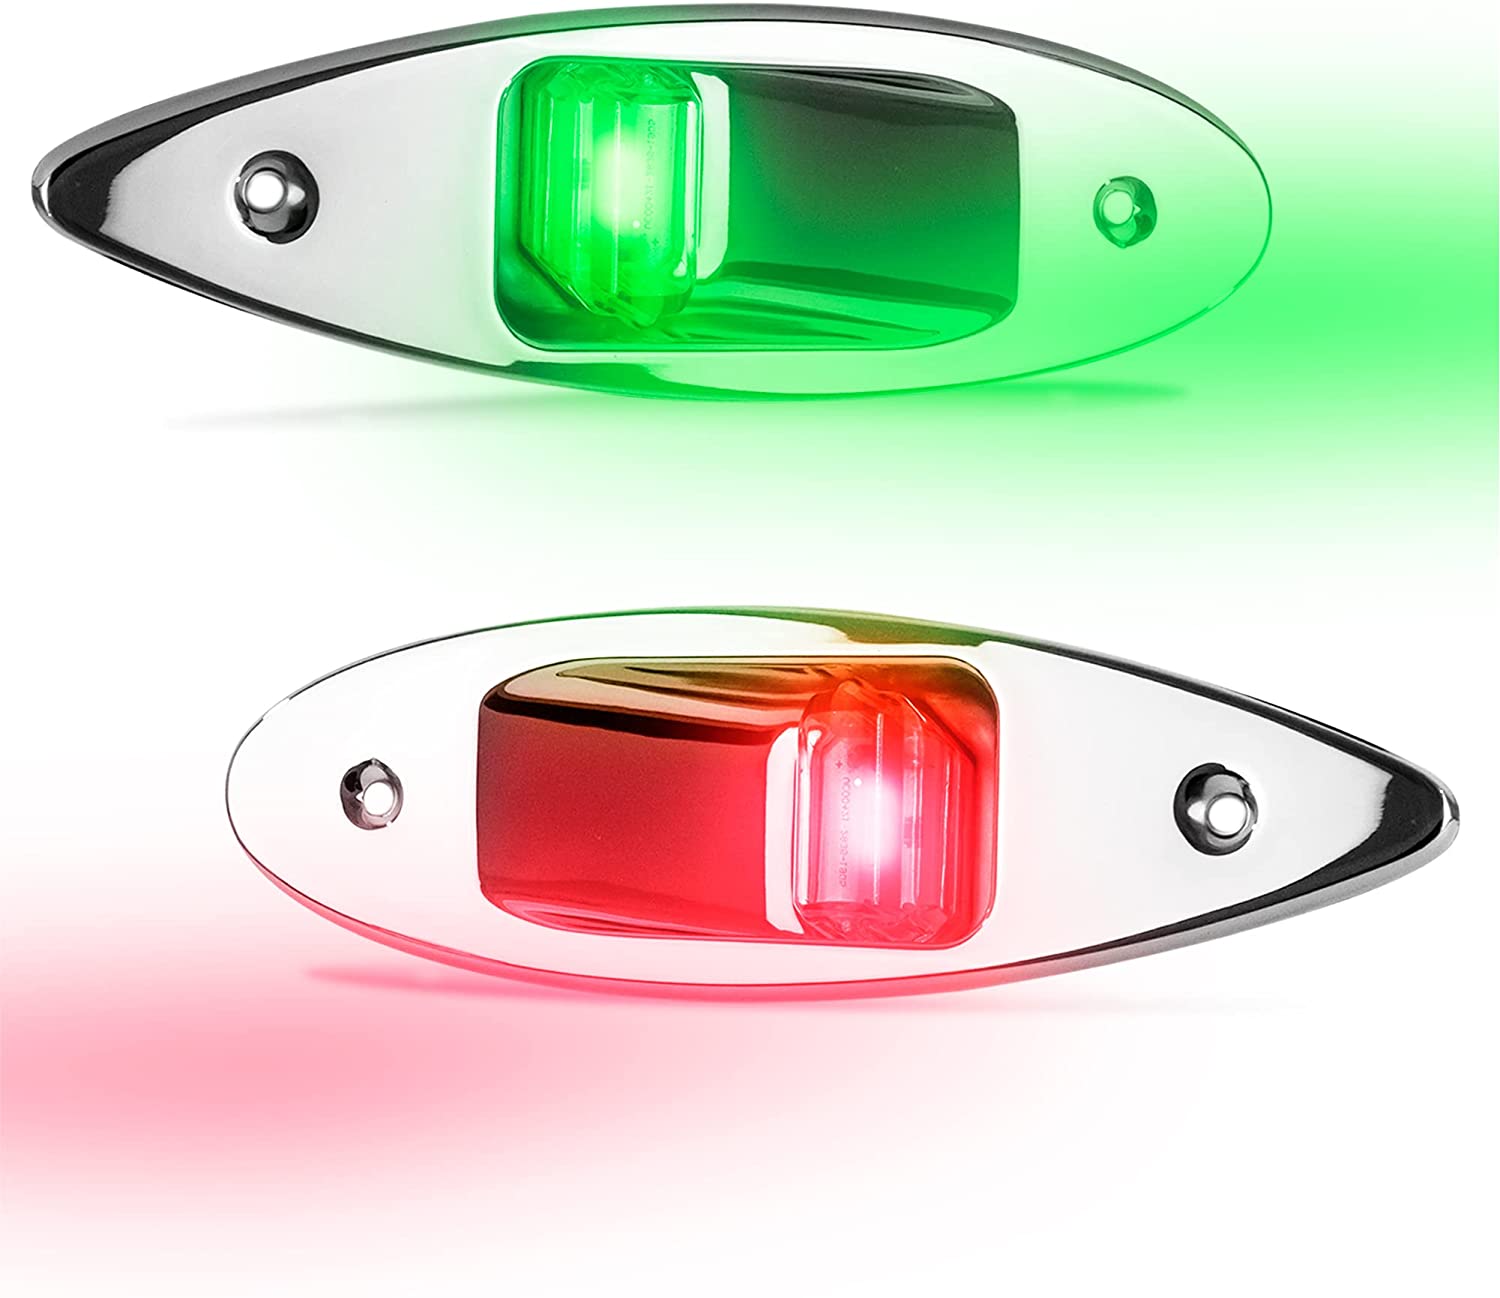 Vertical Mount LED Navigation Side Lights, Starboard (Green) and Port  (Red), AISI304 Stainless Steel, 12 Volts, Visibility 2 NM